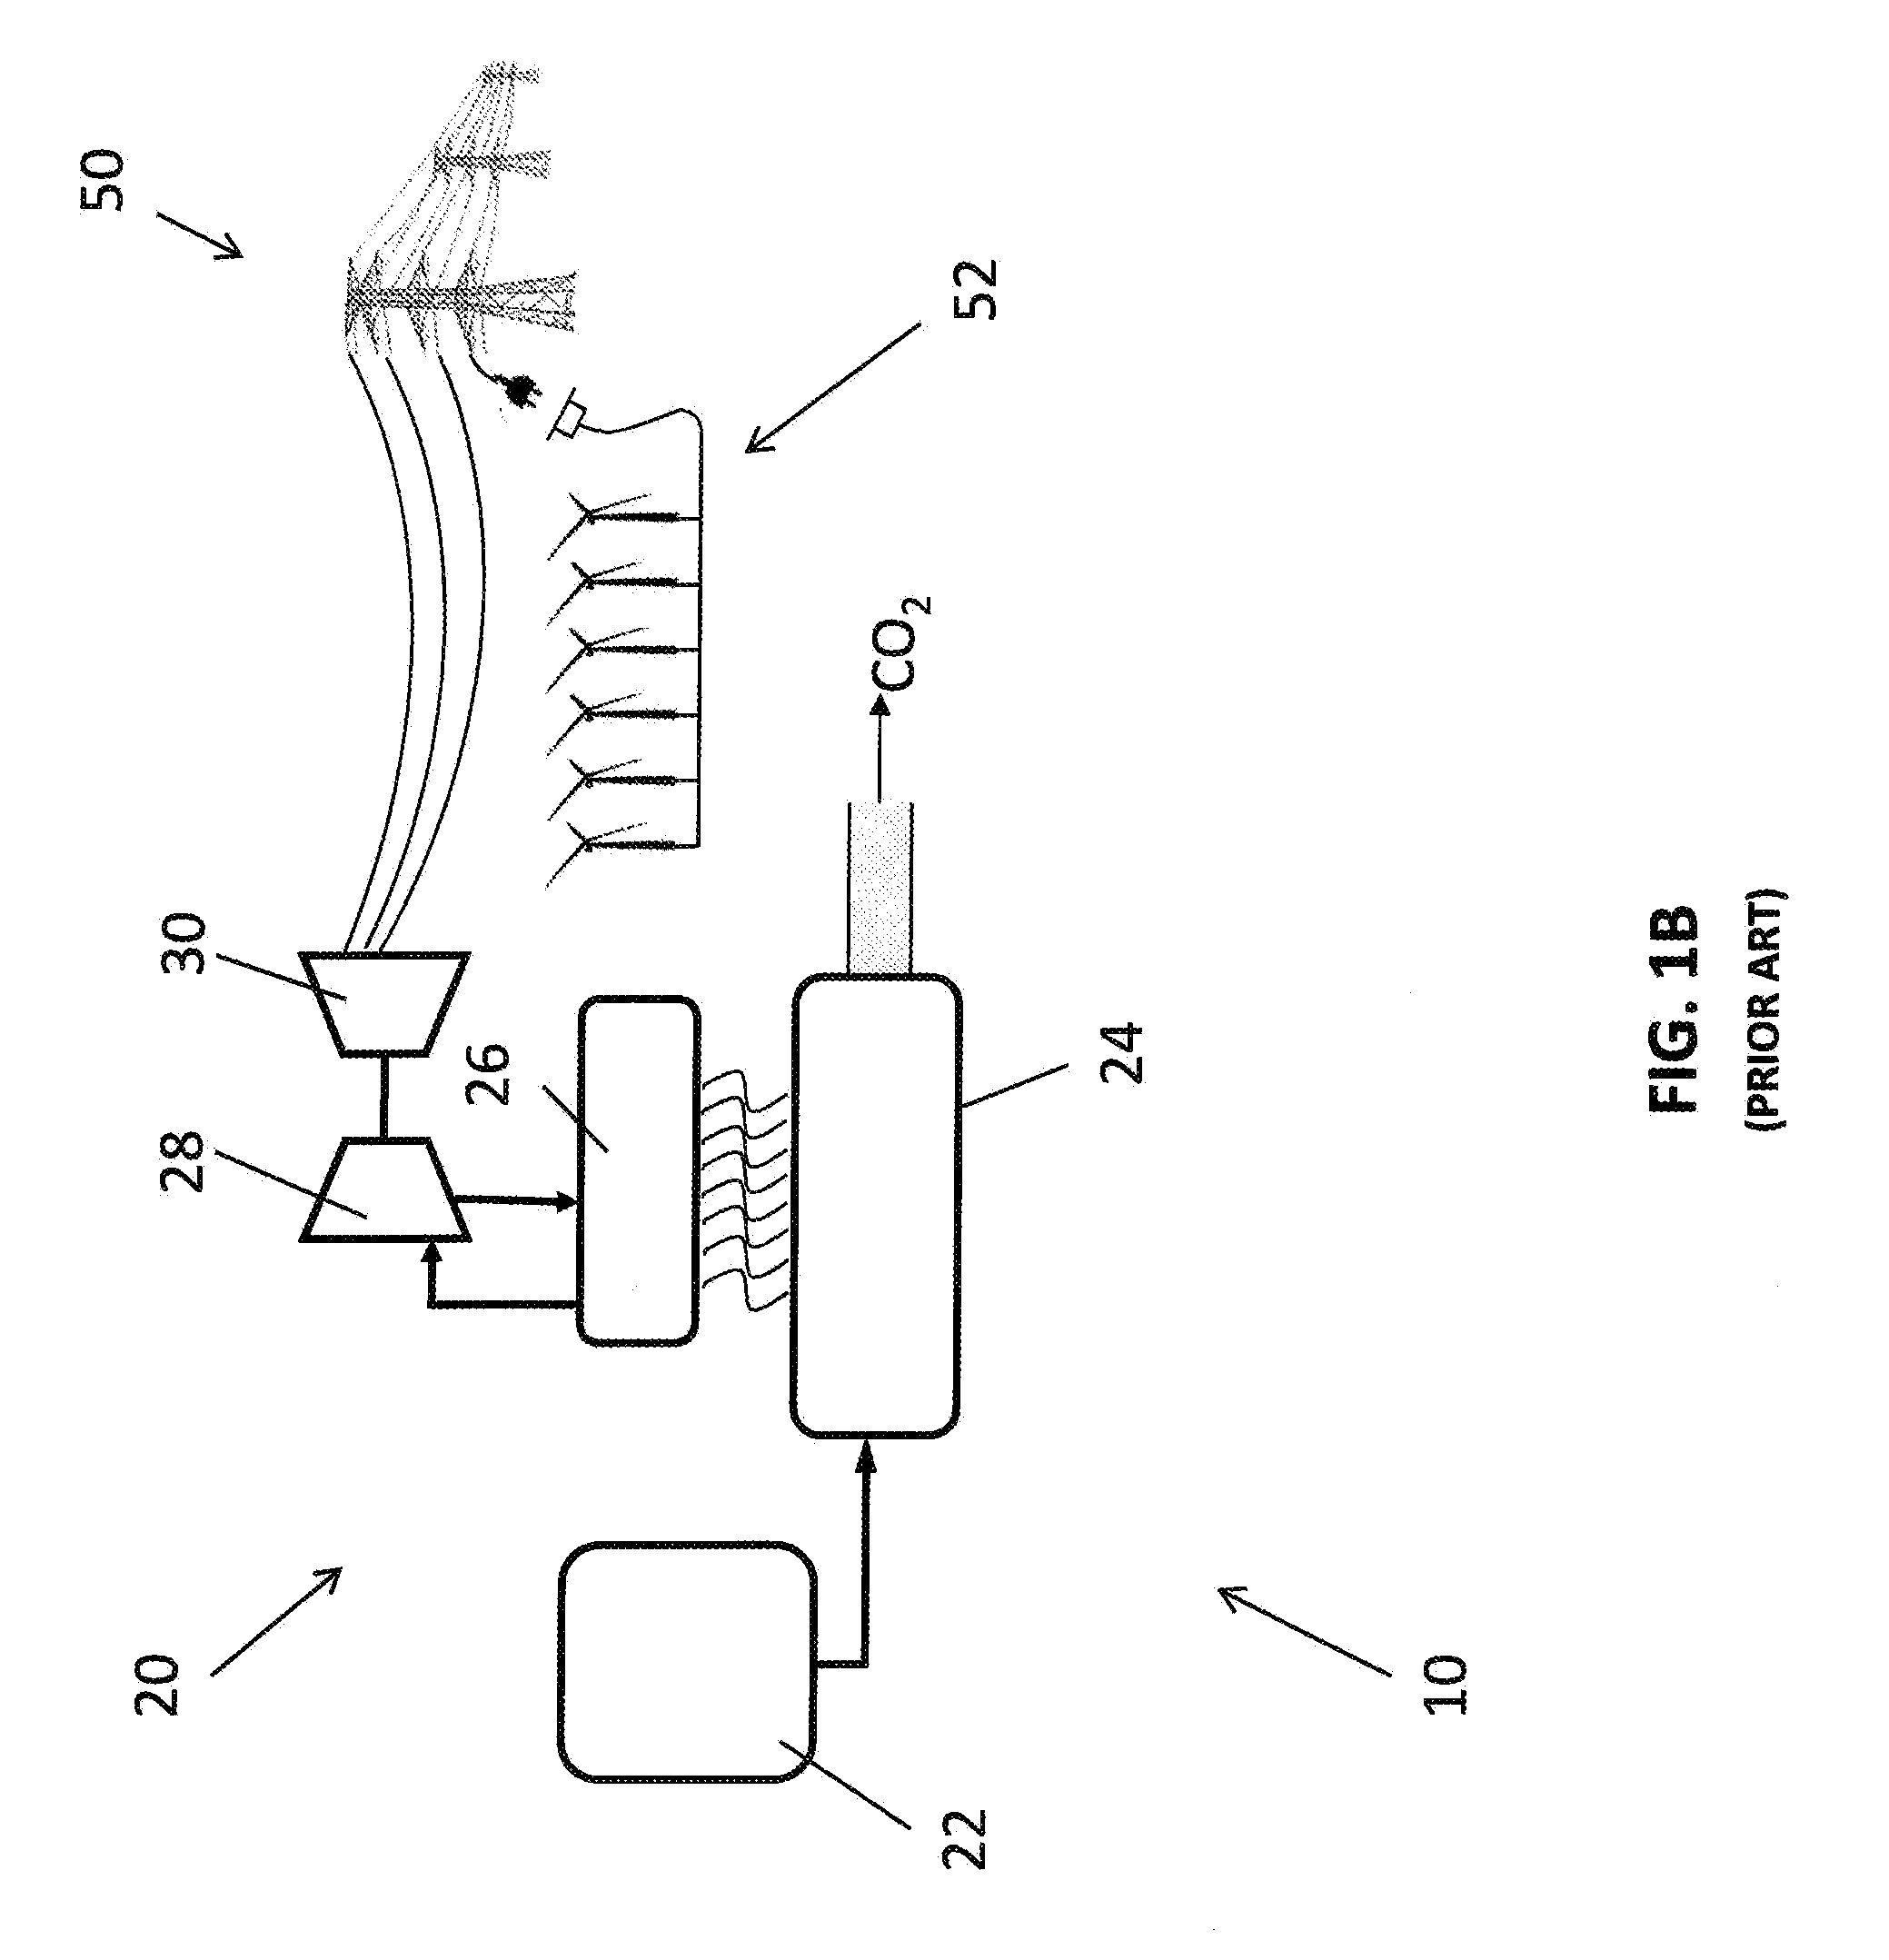 Method of Electricity Distribution Including Grid Energy Storage, Load Leveling, and Recirculating CO2 for Methane Production, and Electricity Generating System